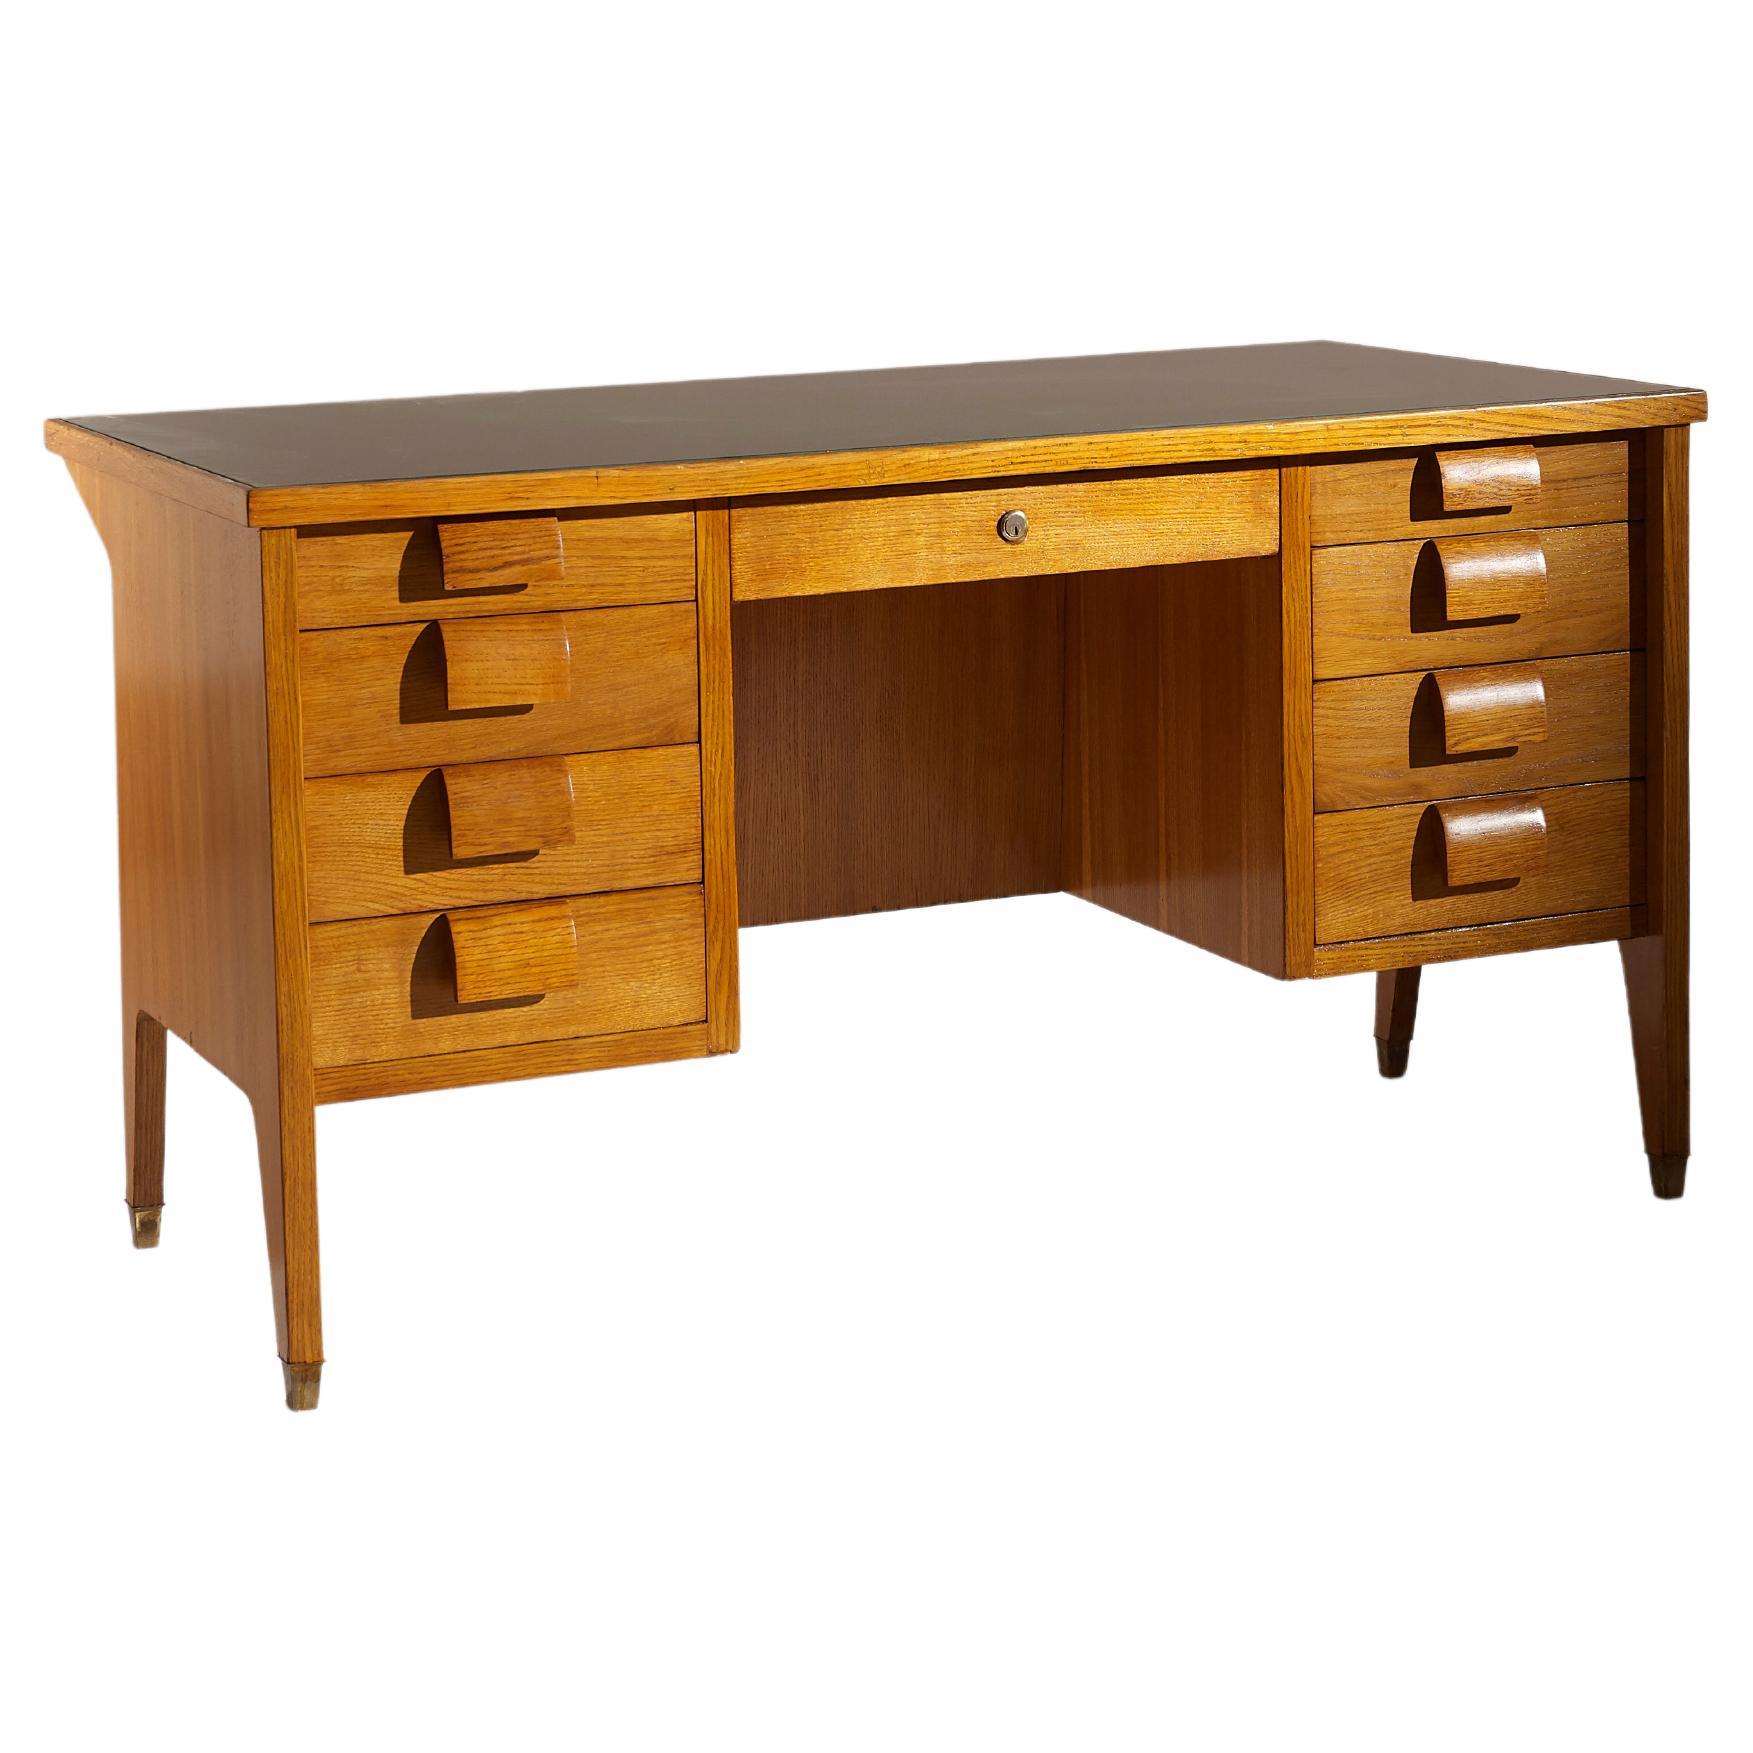 Italian Mid-Century Oak Desk Gio Ponti Inspired, with Brass Feet and Glass Top